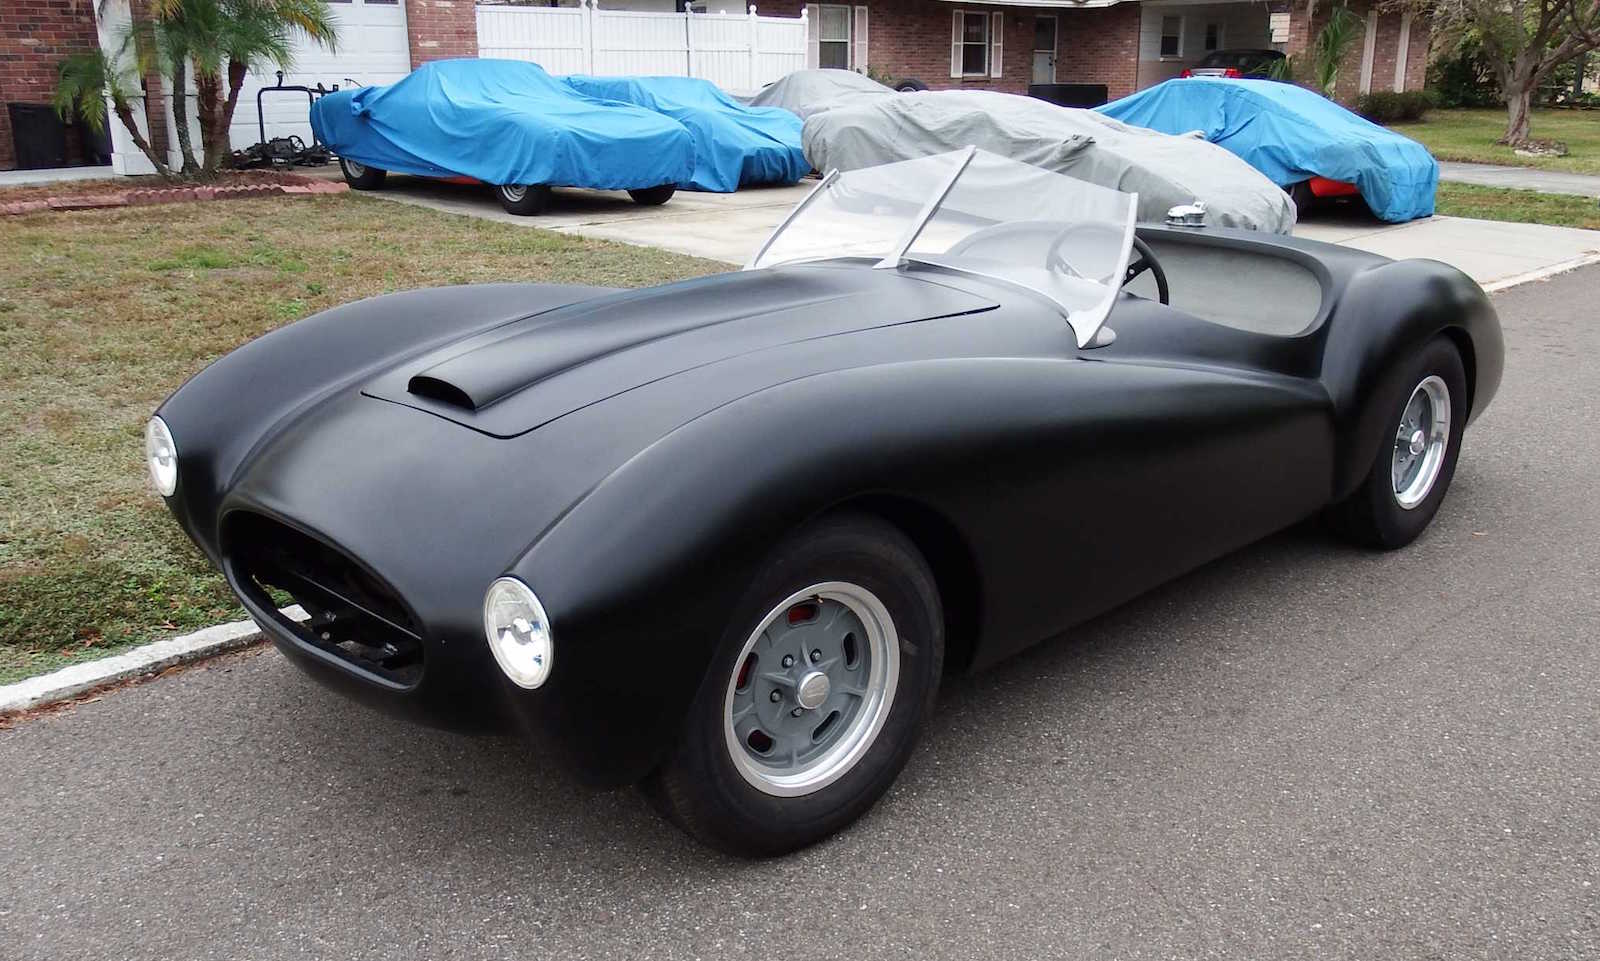 Car Of The Day - 1953 Victress S1A  Roadster For Sale On eBay